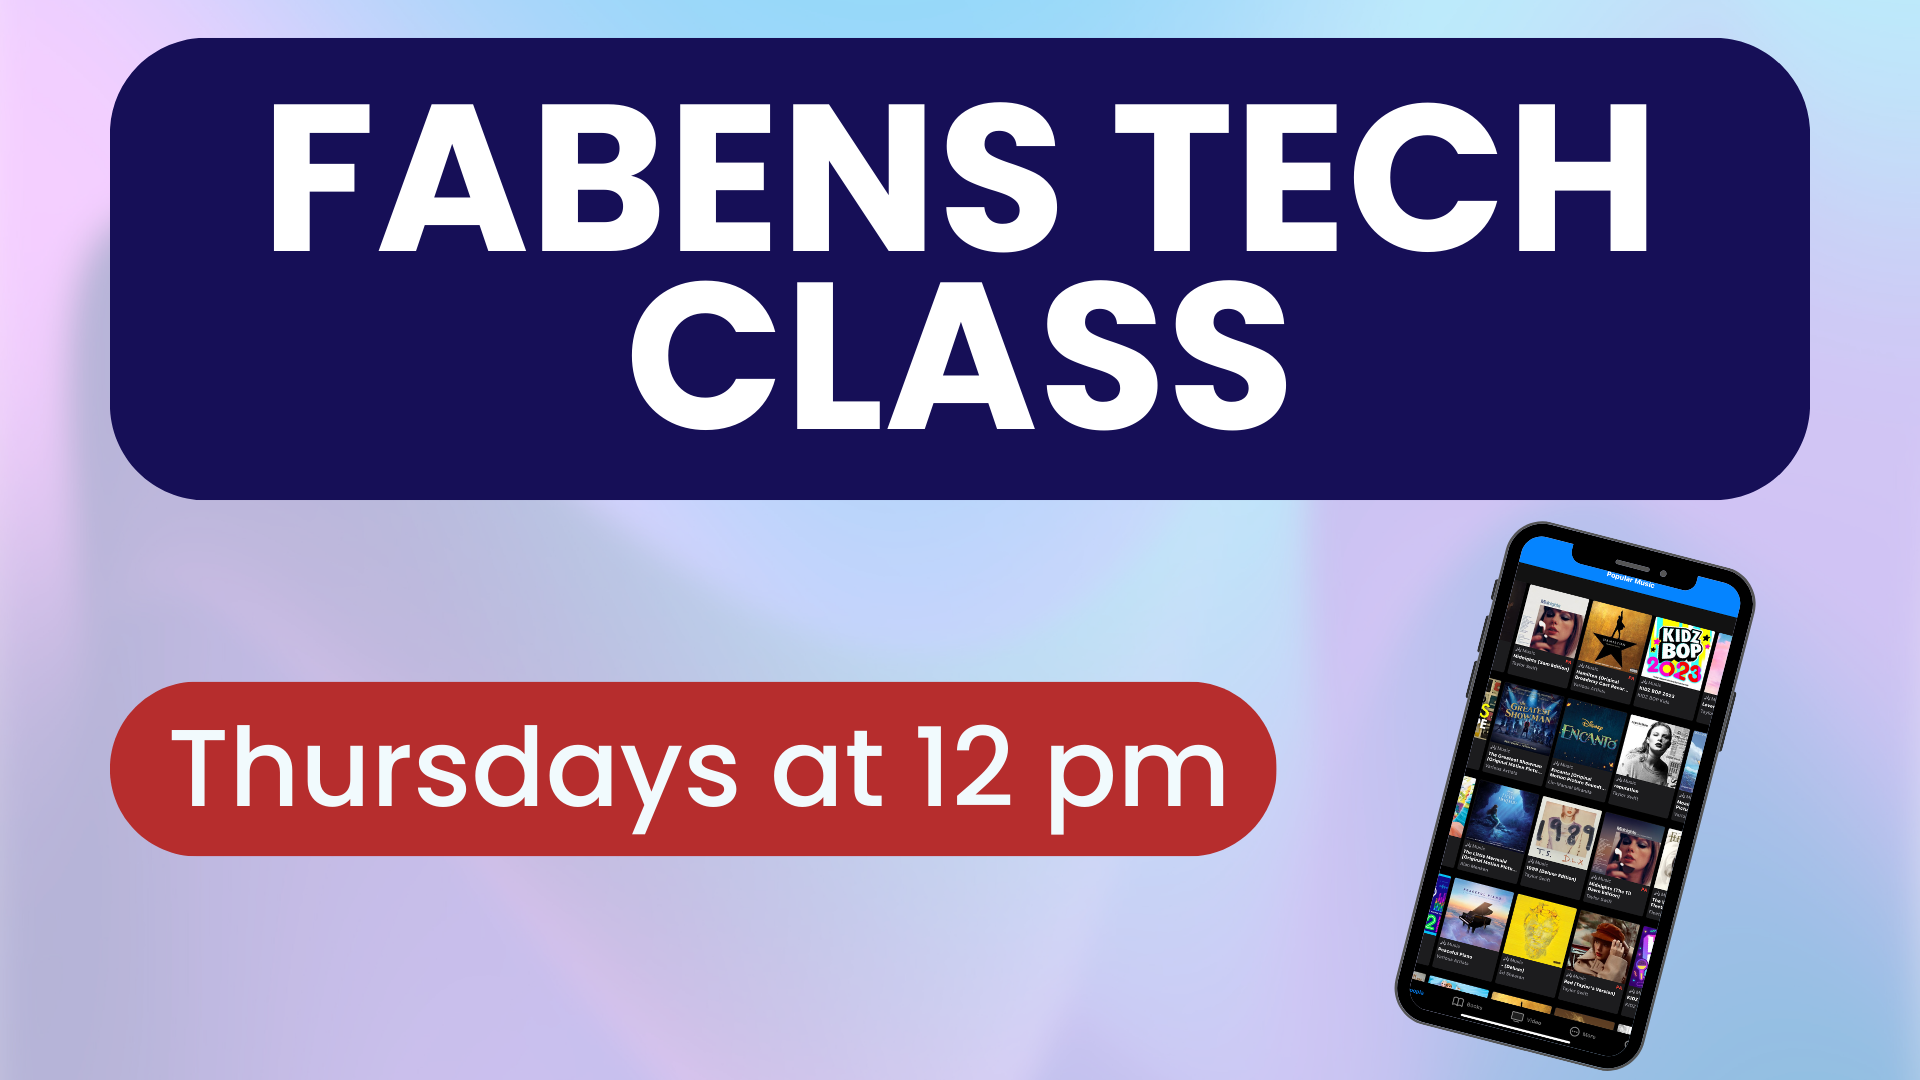 Library program flyer promoting a technology class in Fabens, Texas.